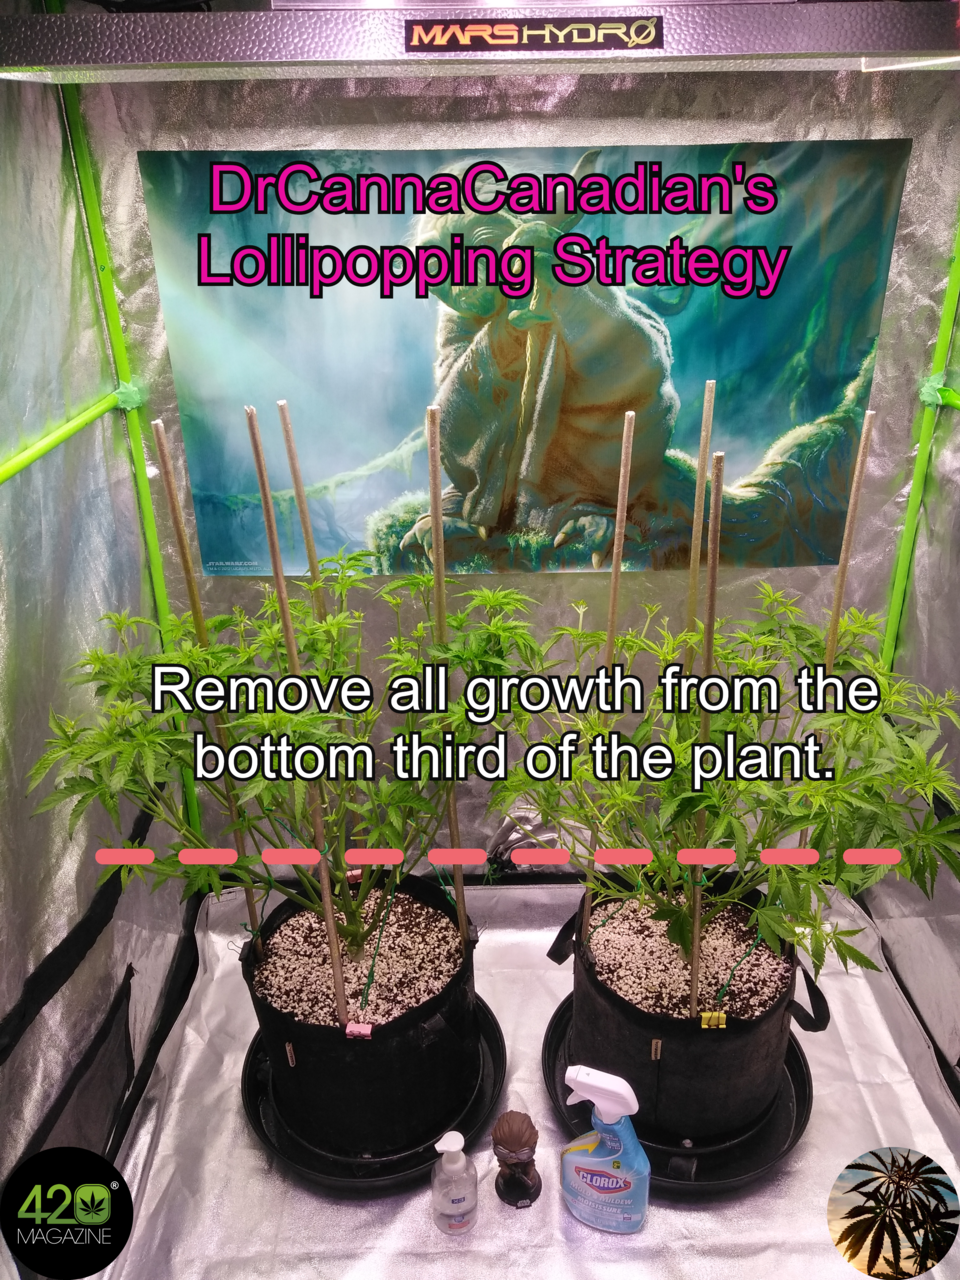 High Stress Training (HST) - DrCannaCanadian's "Lollipopping" Strategy